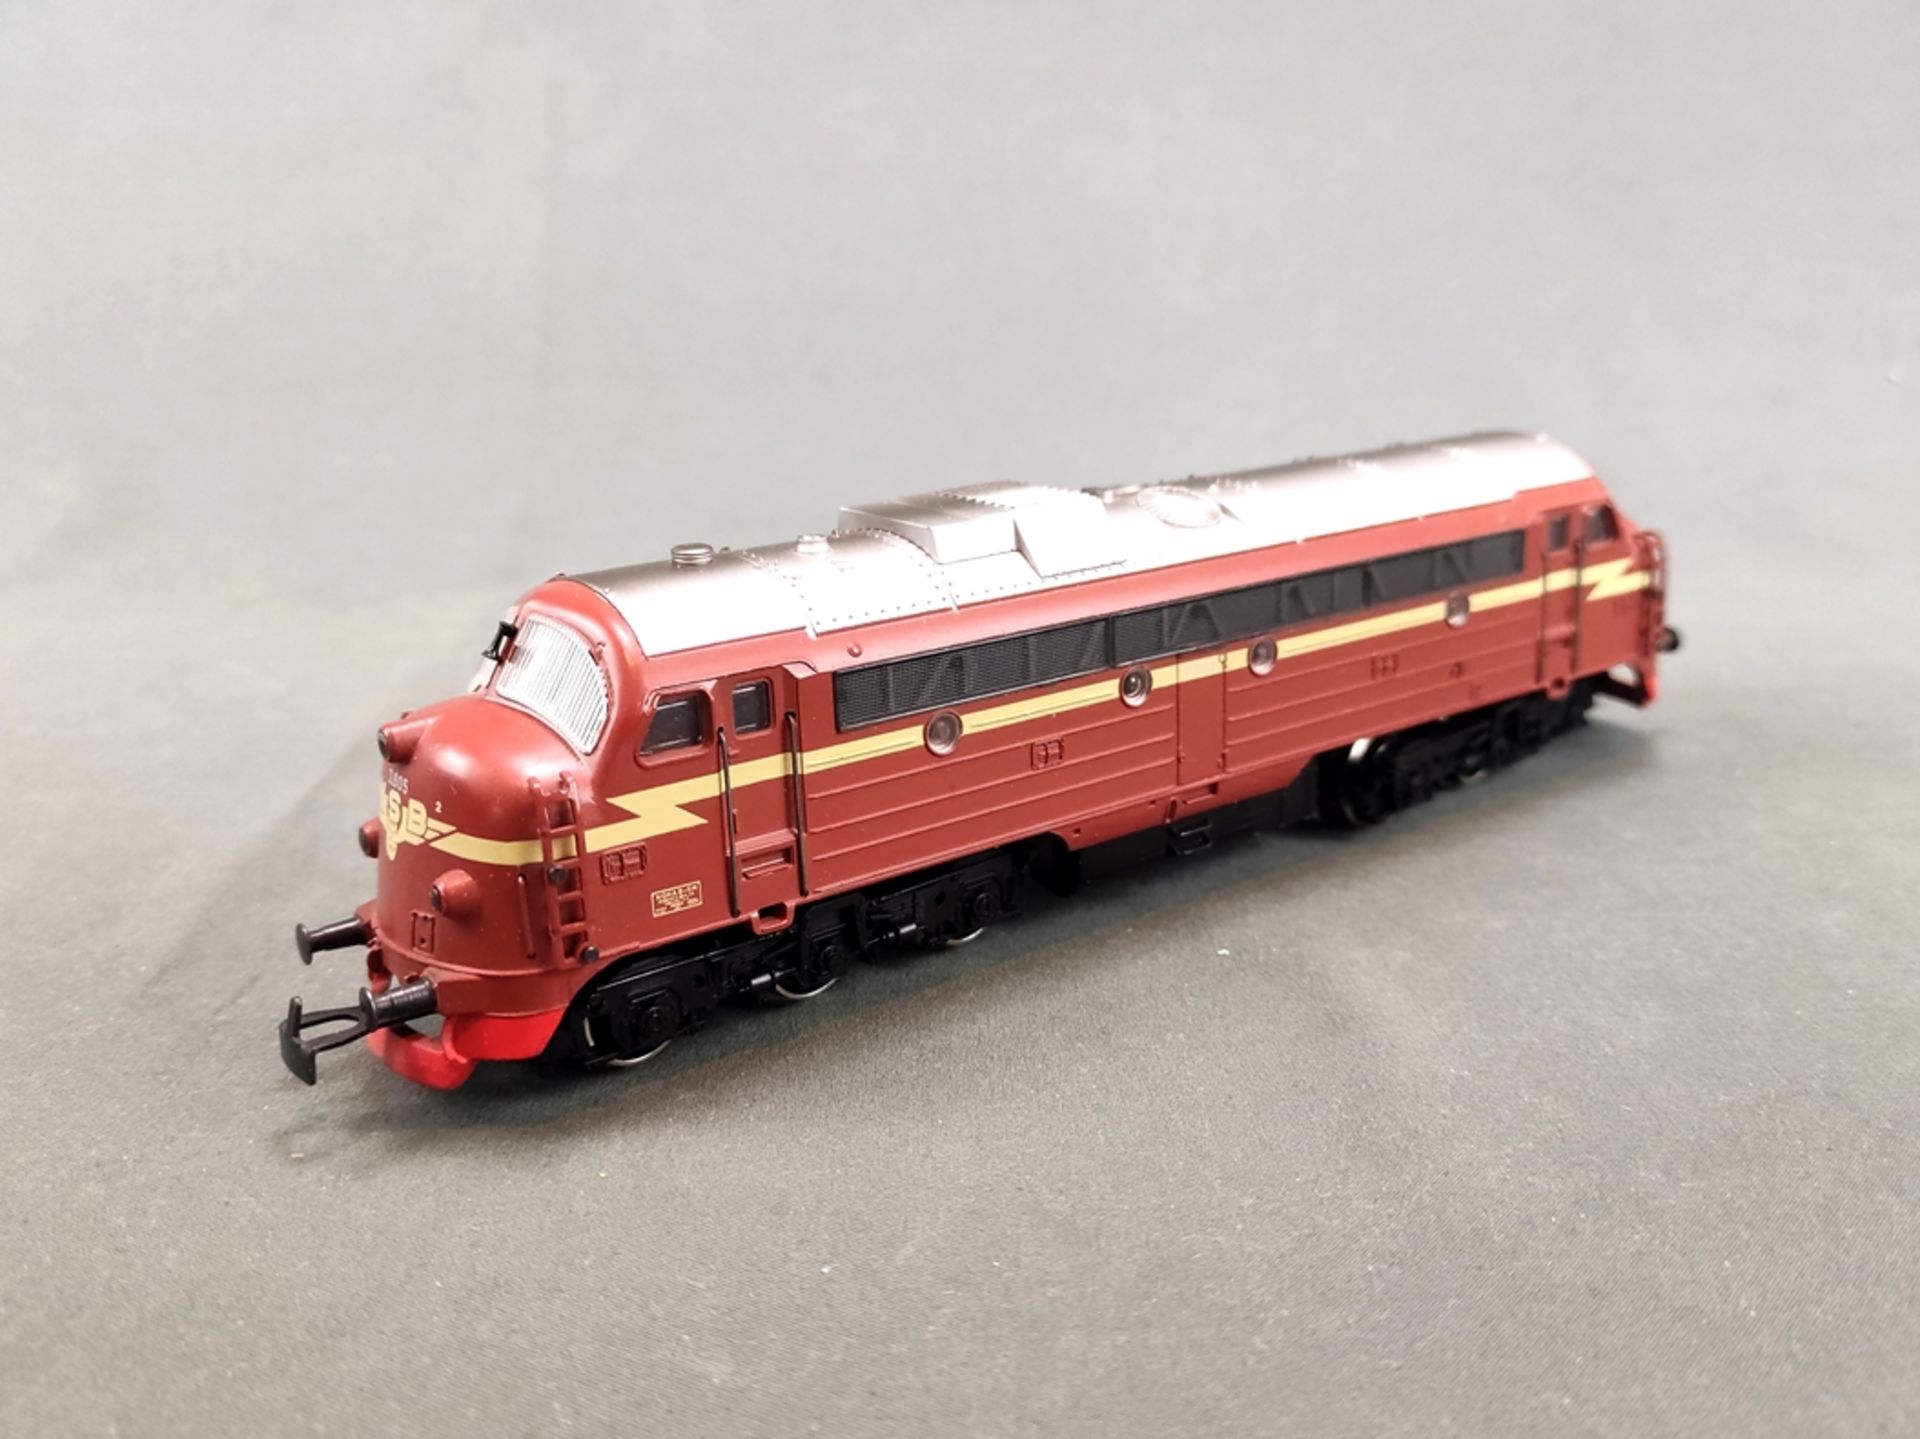 H0 Märklin 3143 Diesel locomotive, function not tested, in original box, from collection - Image 2 of 3